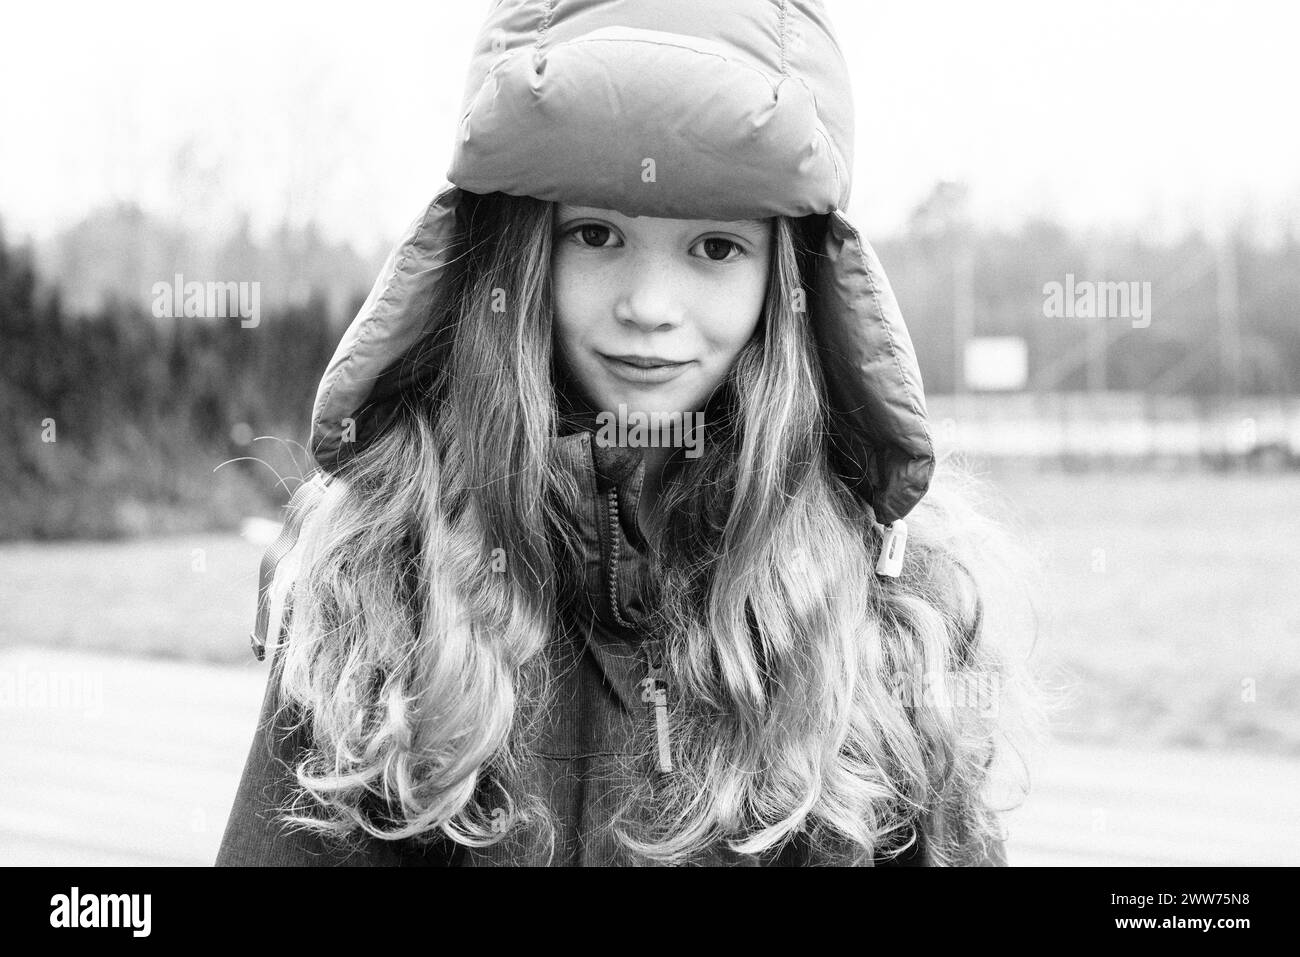 portrait of a girl aged 9 with long hair and a winter hat on Stock Photo